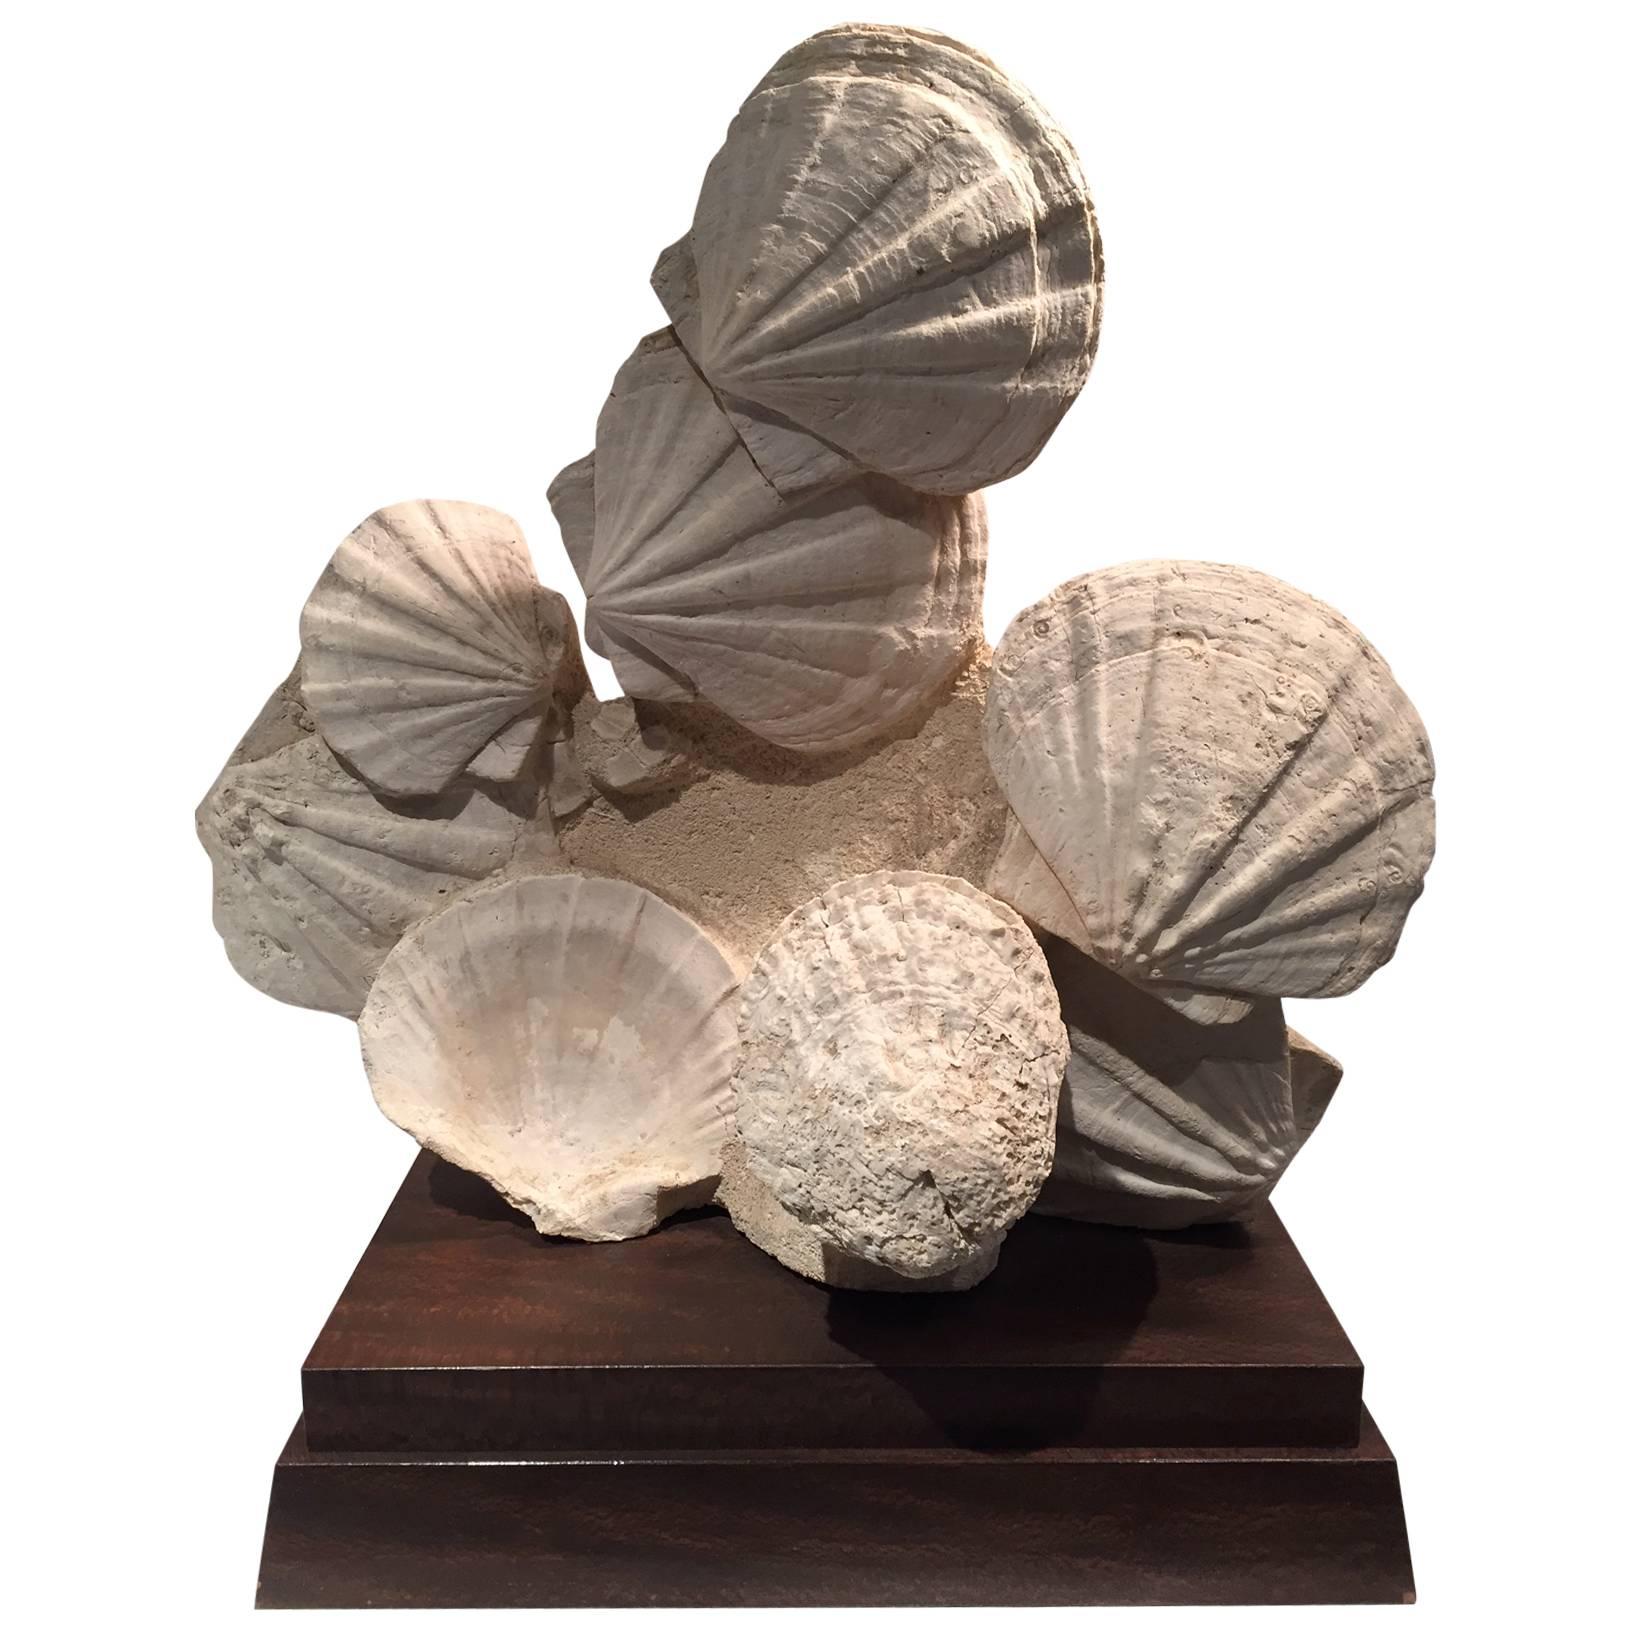 Large Mounted Prehistoric Pecten Fossil Specimen from the Carboniferous Period